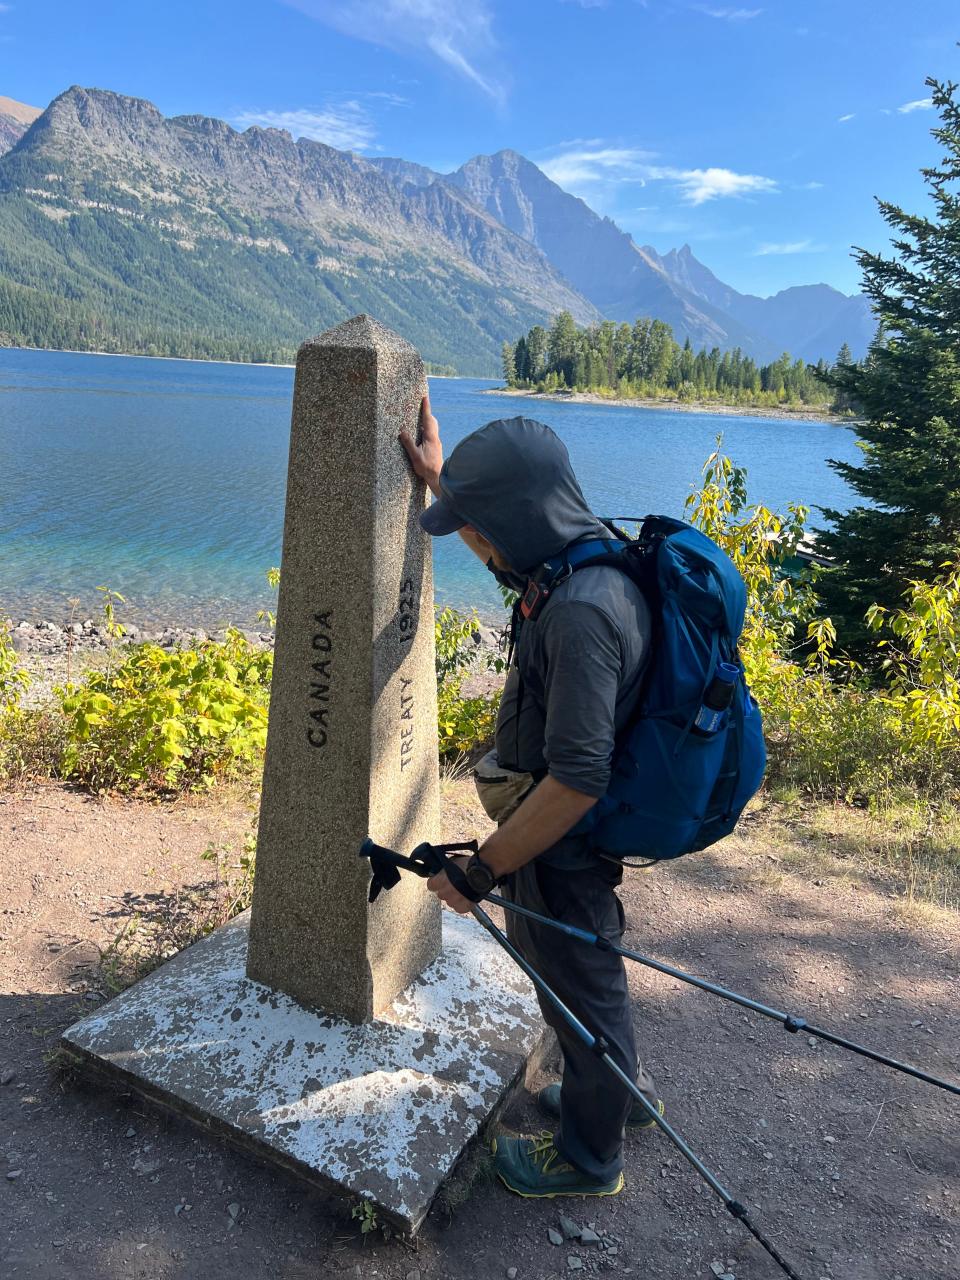 Brendan Hickman, who is from Augusta County but now lives in Oregon, finished hiking the Continental Divide Trail on Aug. 29, making it in record time.